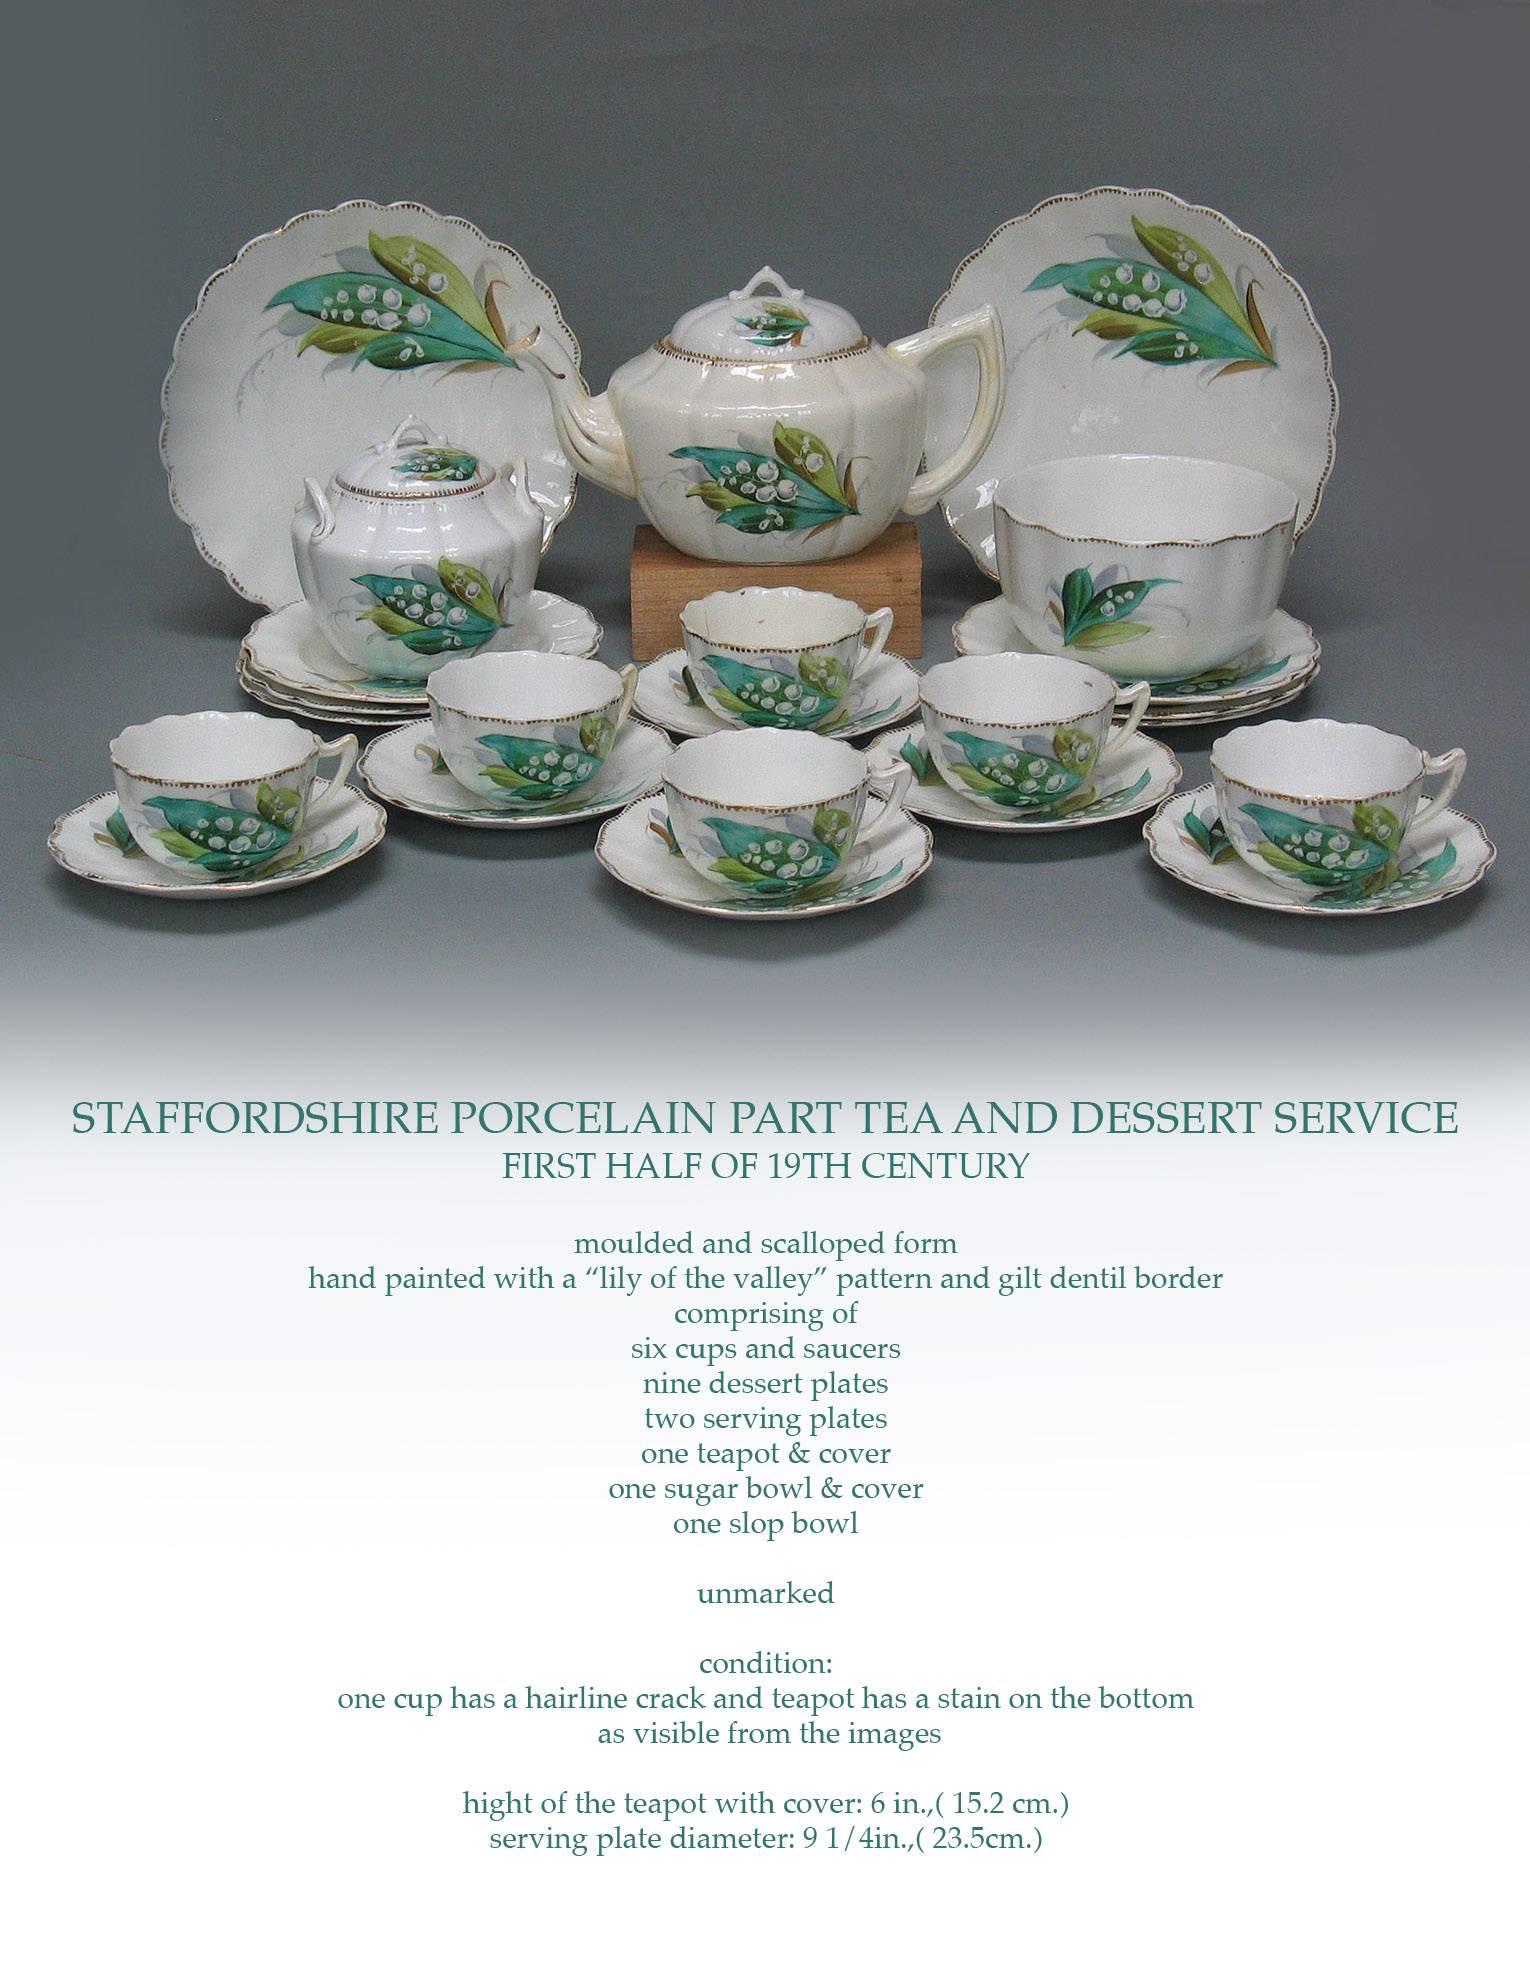 Staffordshire Porcelain part tea and dessert service, first half of the 19th century, Molded and scalloped form, hand-painted with 